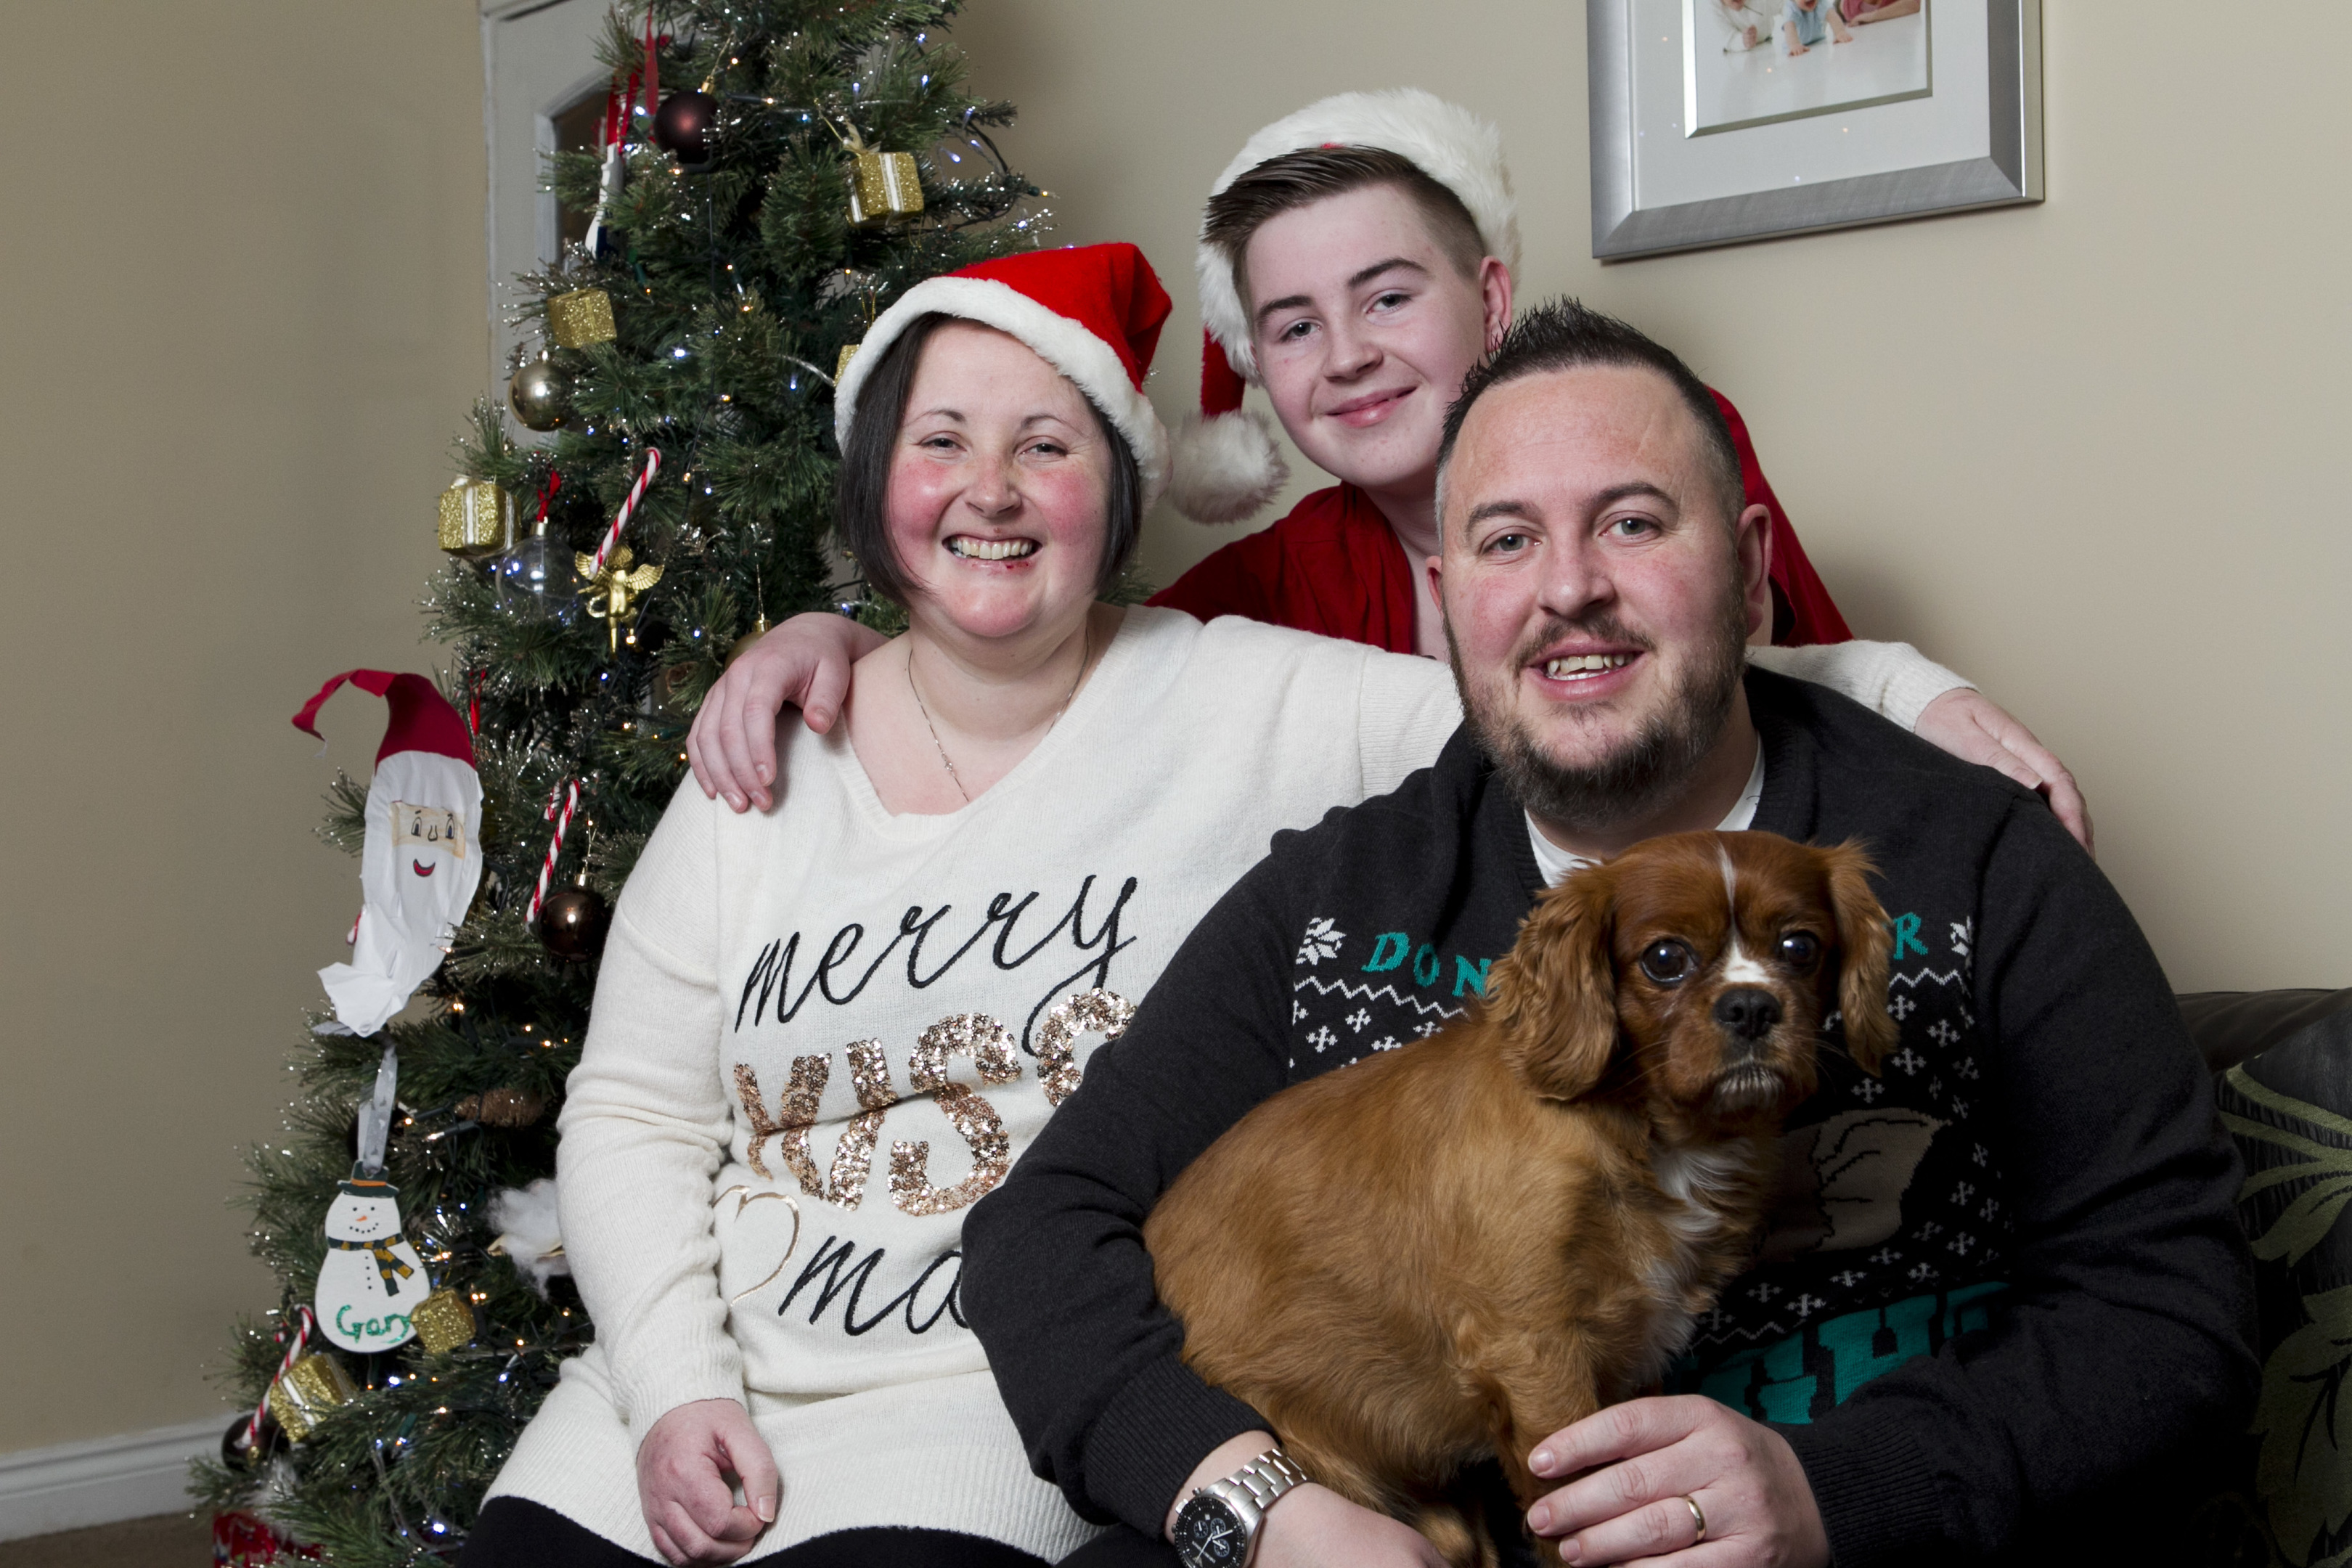 Caroline Burns, with husband Gary, and son Jack. Caroline had a brain tumour, and was told she only had a few months to live - now two years later she is happy to be enjoying Christmas with her family. (Andrew Cawley, Sunday Post)